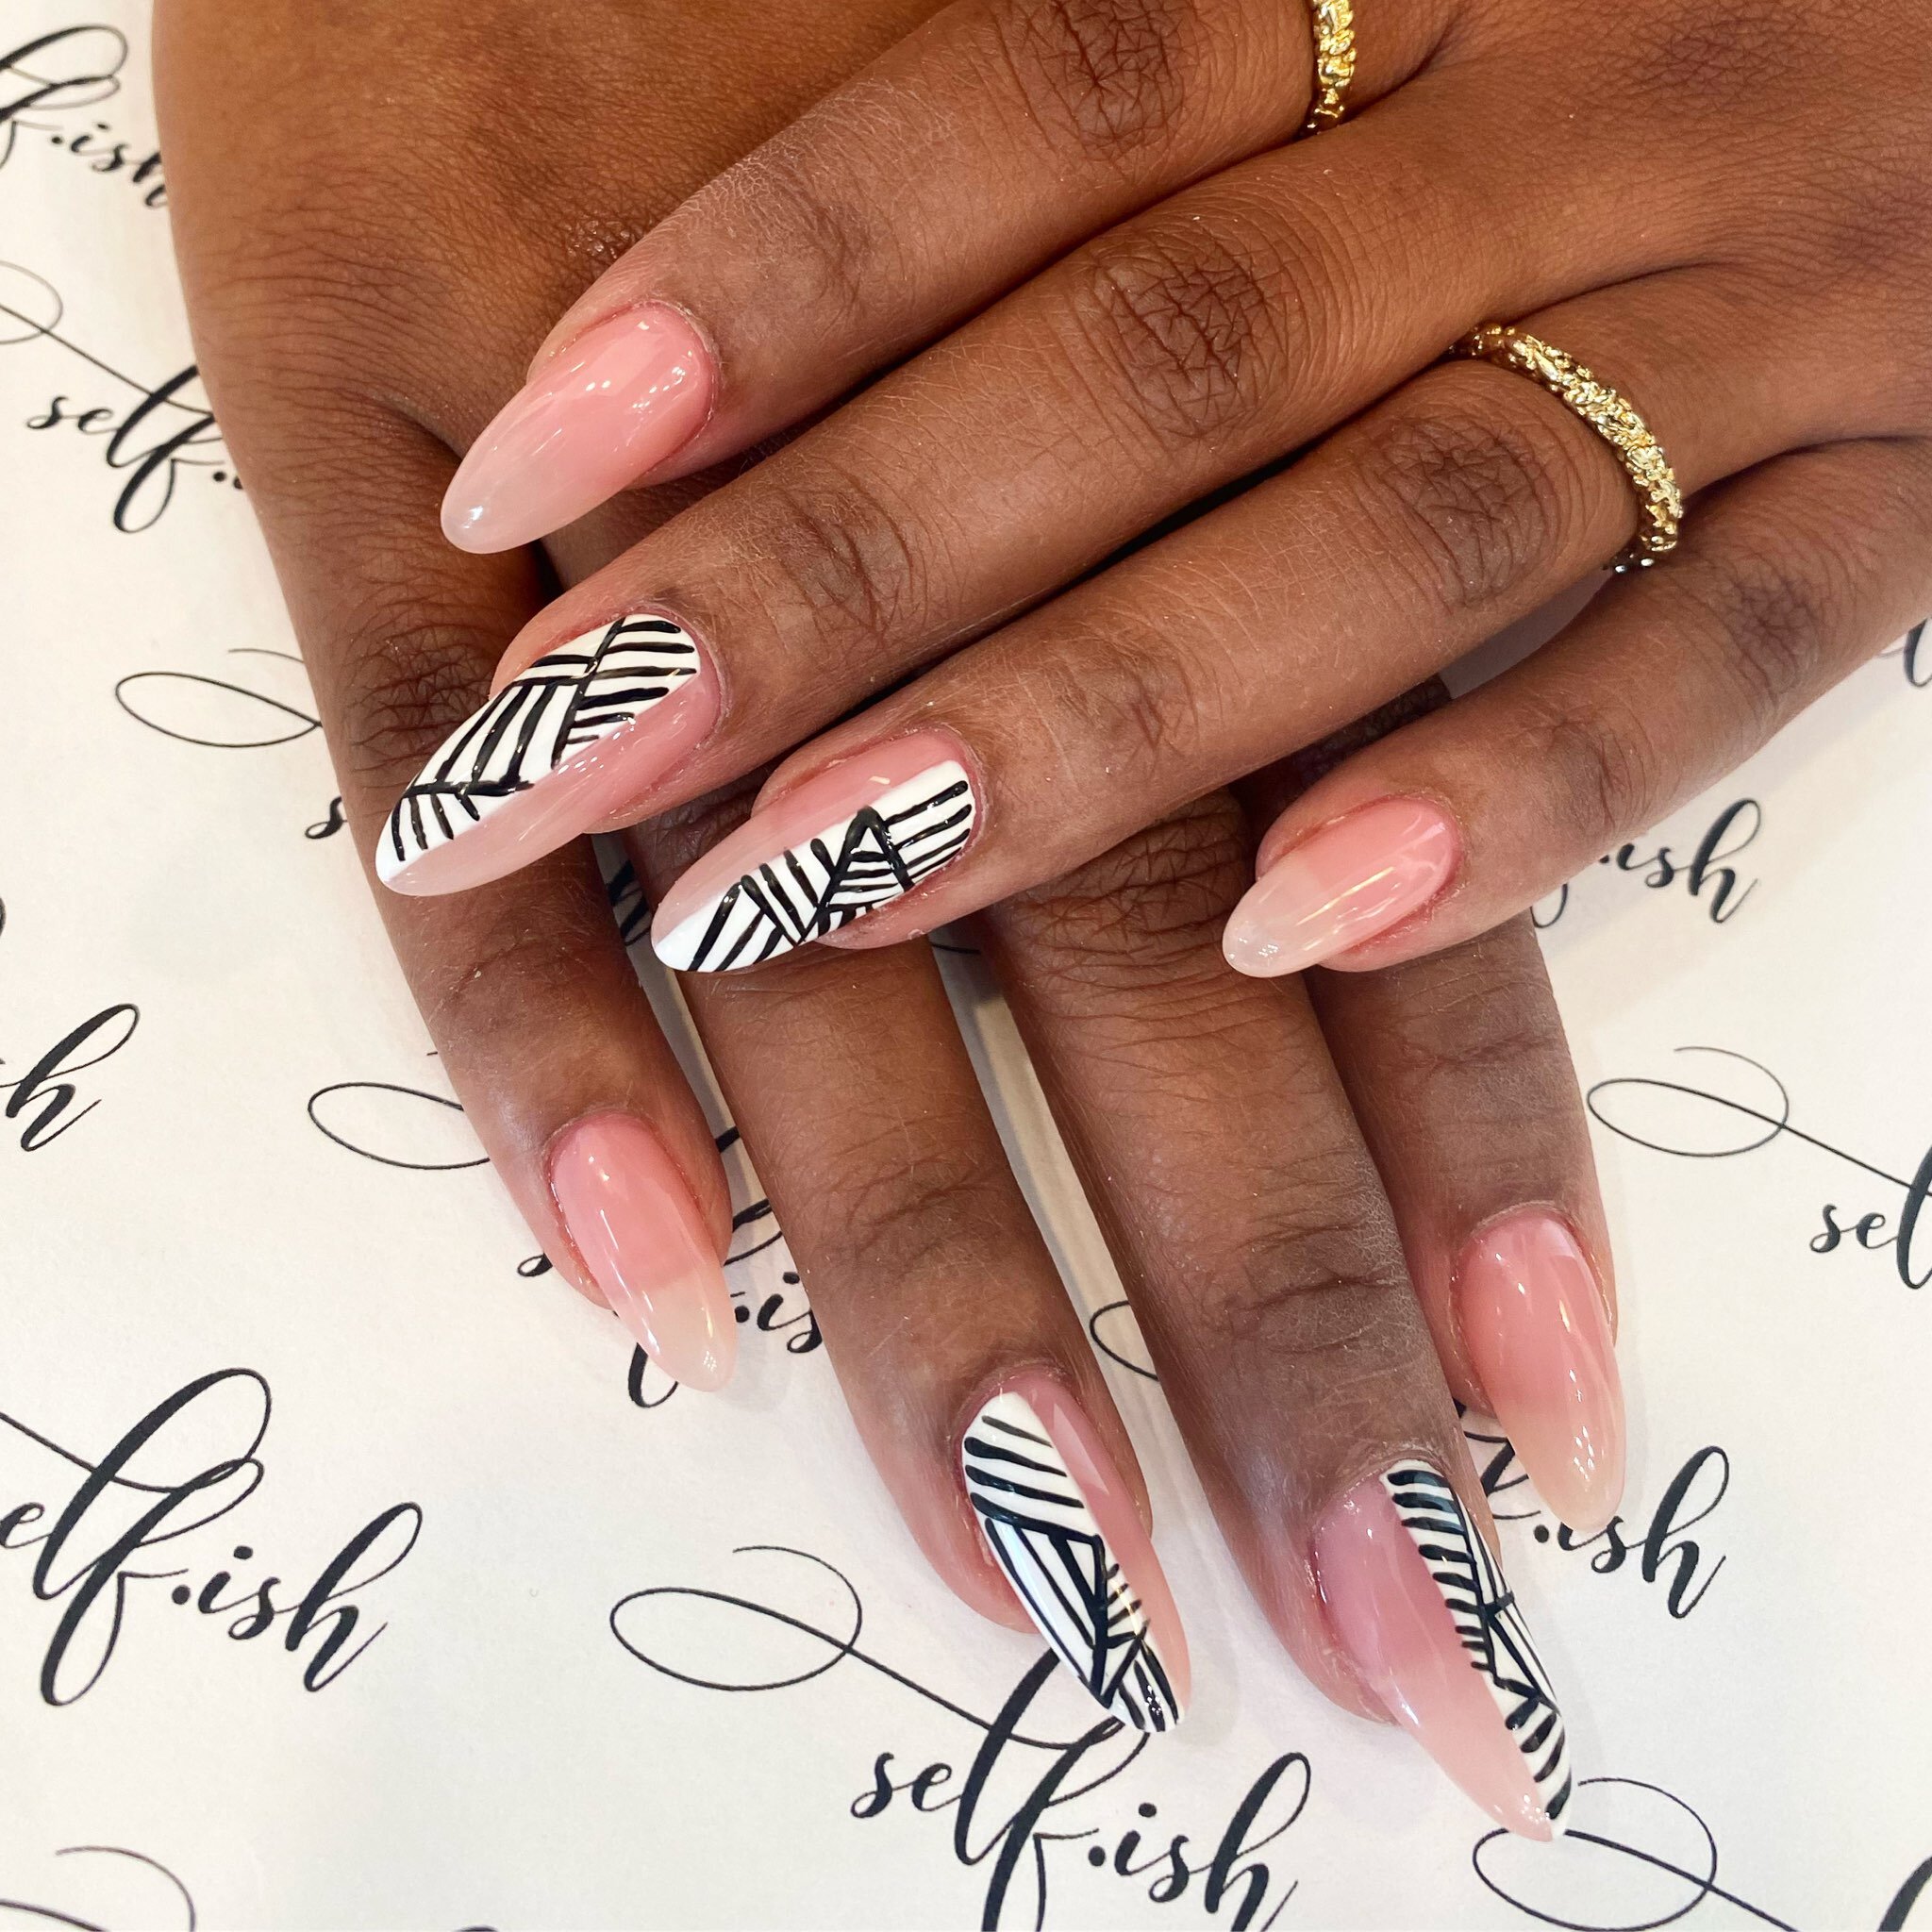 Nails we love! All done at Selfish of course. —  Beauty Spa